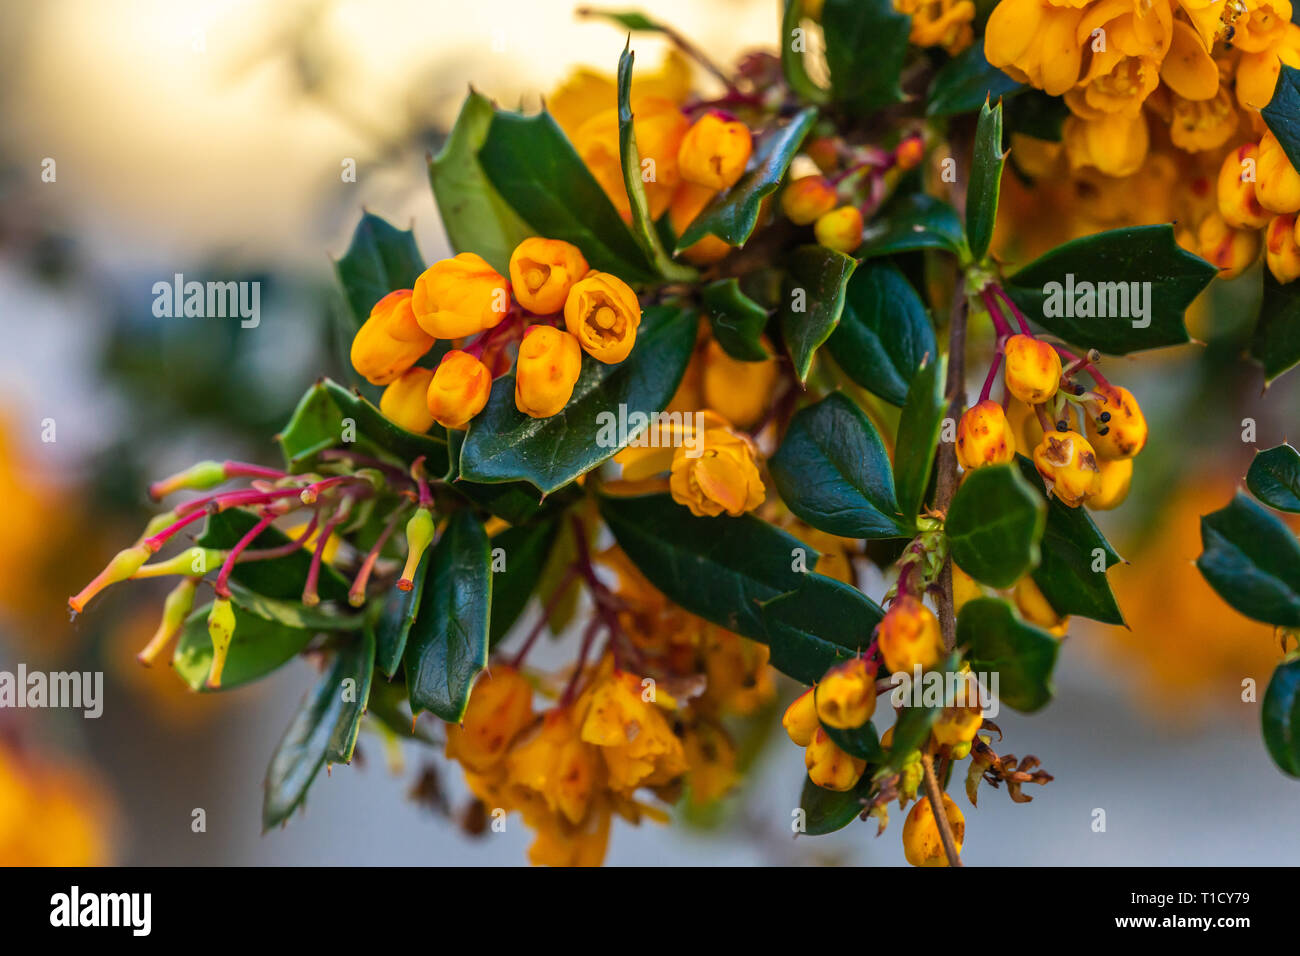 Darwin's barberry - Berberis darwinii - an evergreen shrub with its colourful drooping racemes of rich orange flowers during spring in the UK Stock Photo